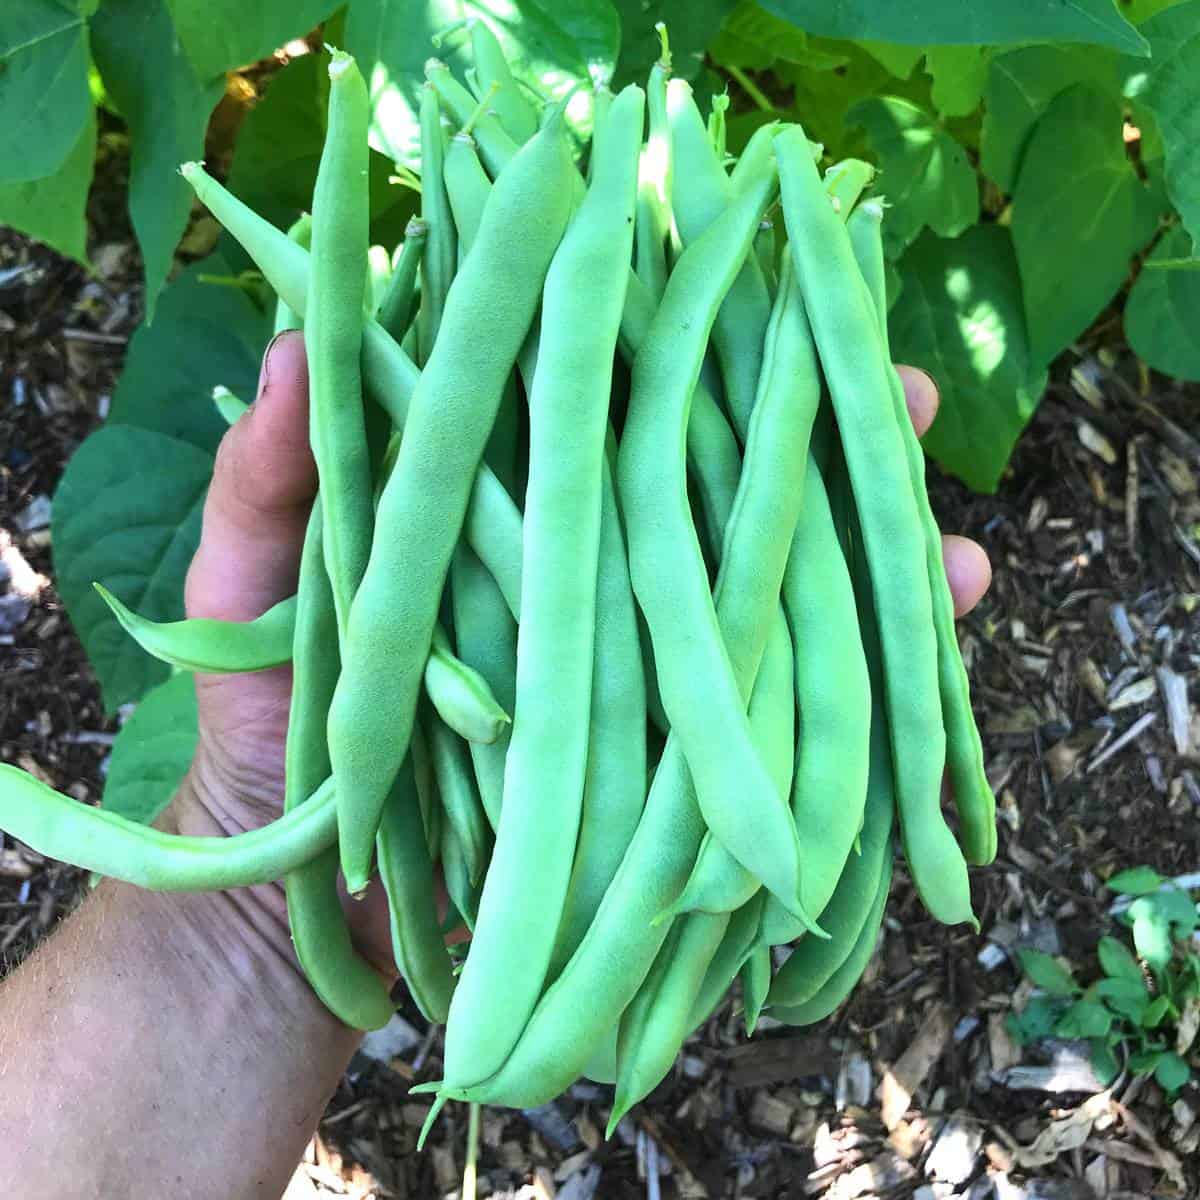 How To Store Green Beans From Garden